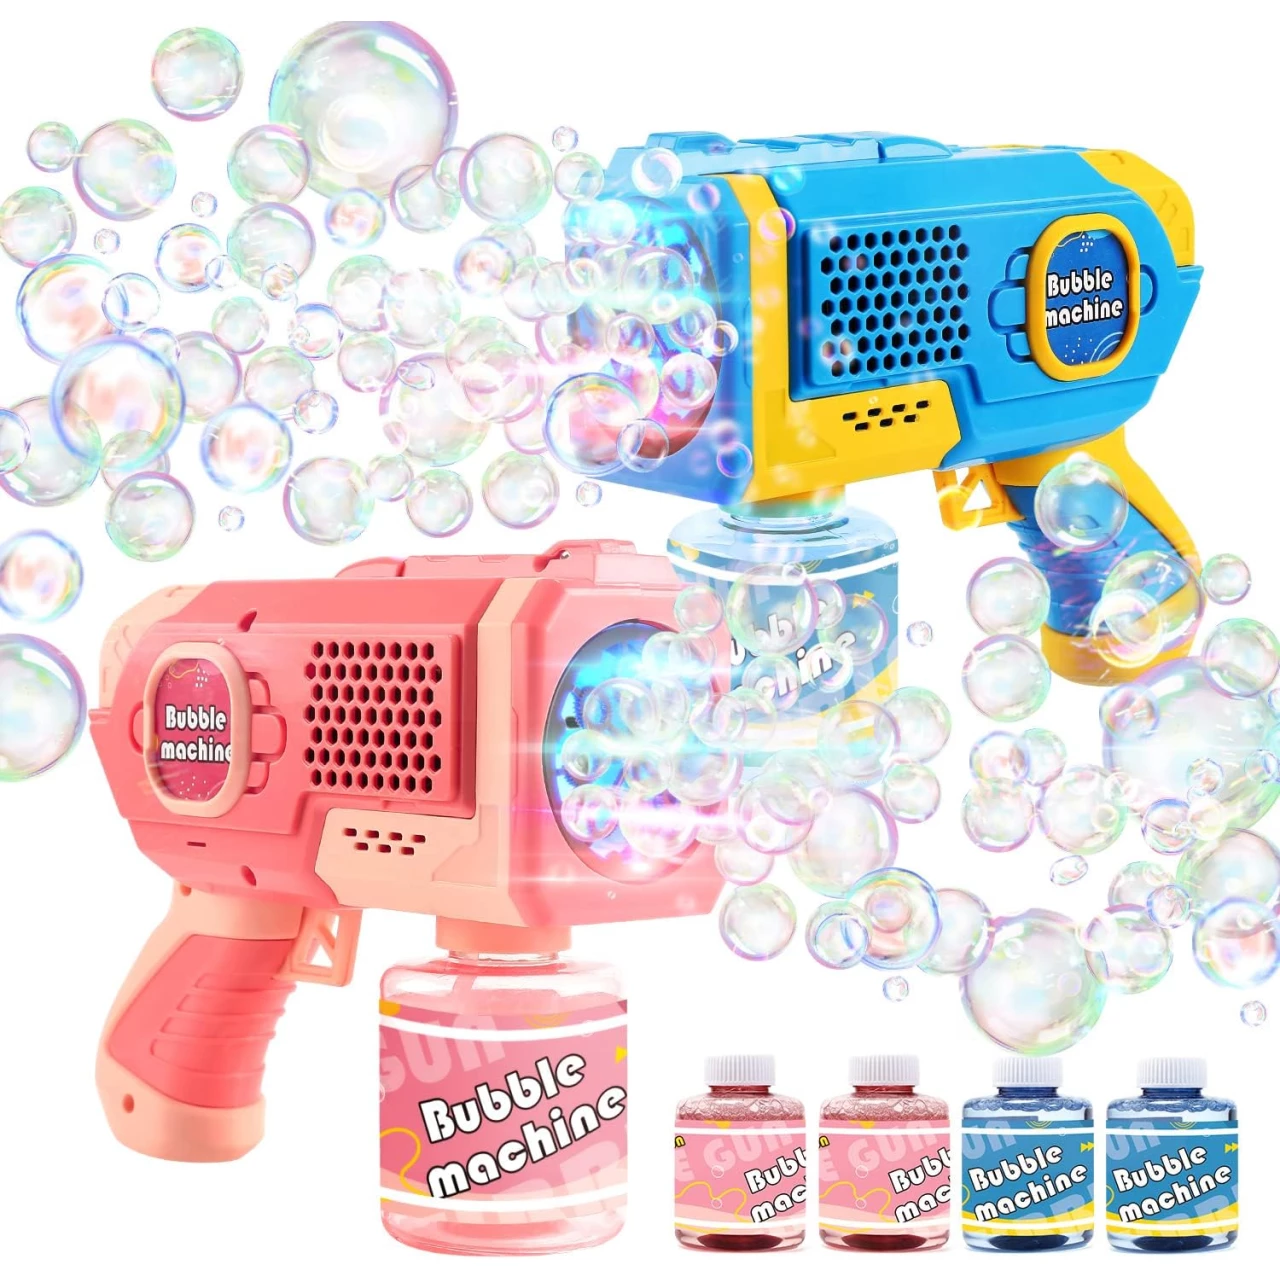 EagleStone 2 Bubble Guns for Toddlers, Automatic Bubble Machine for Kids, Bubble Blower w/ 4 Bottles Bubble Solution Refill &amp; LED Lights, Bubbles Party Favors for Summer Outdoor Toy Birthday Gifts